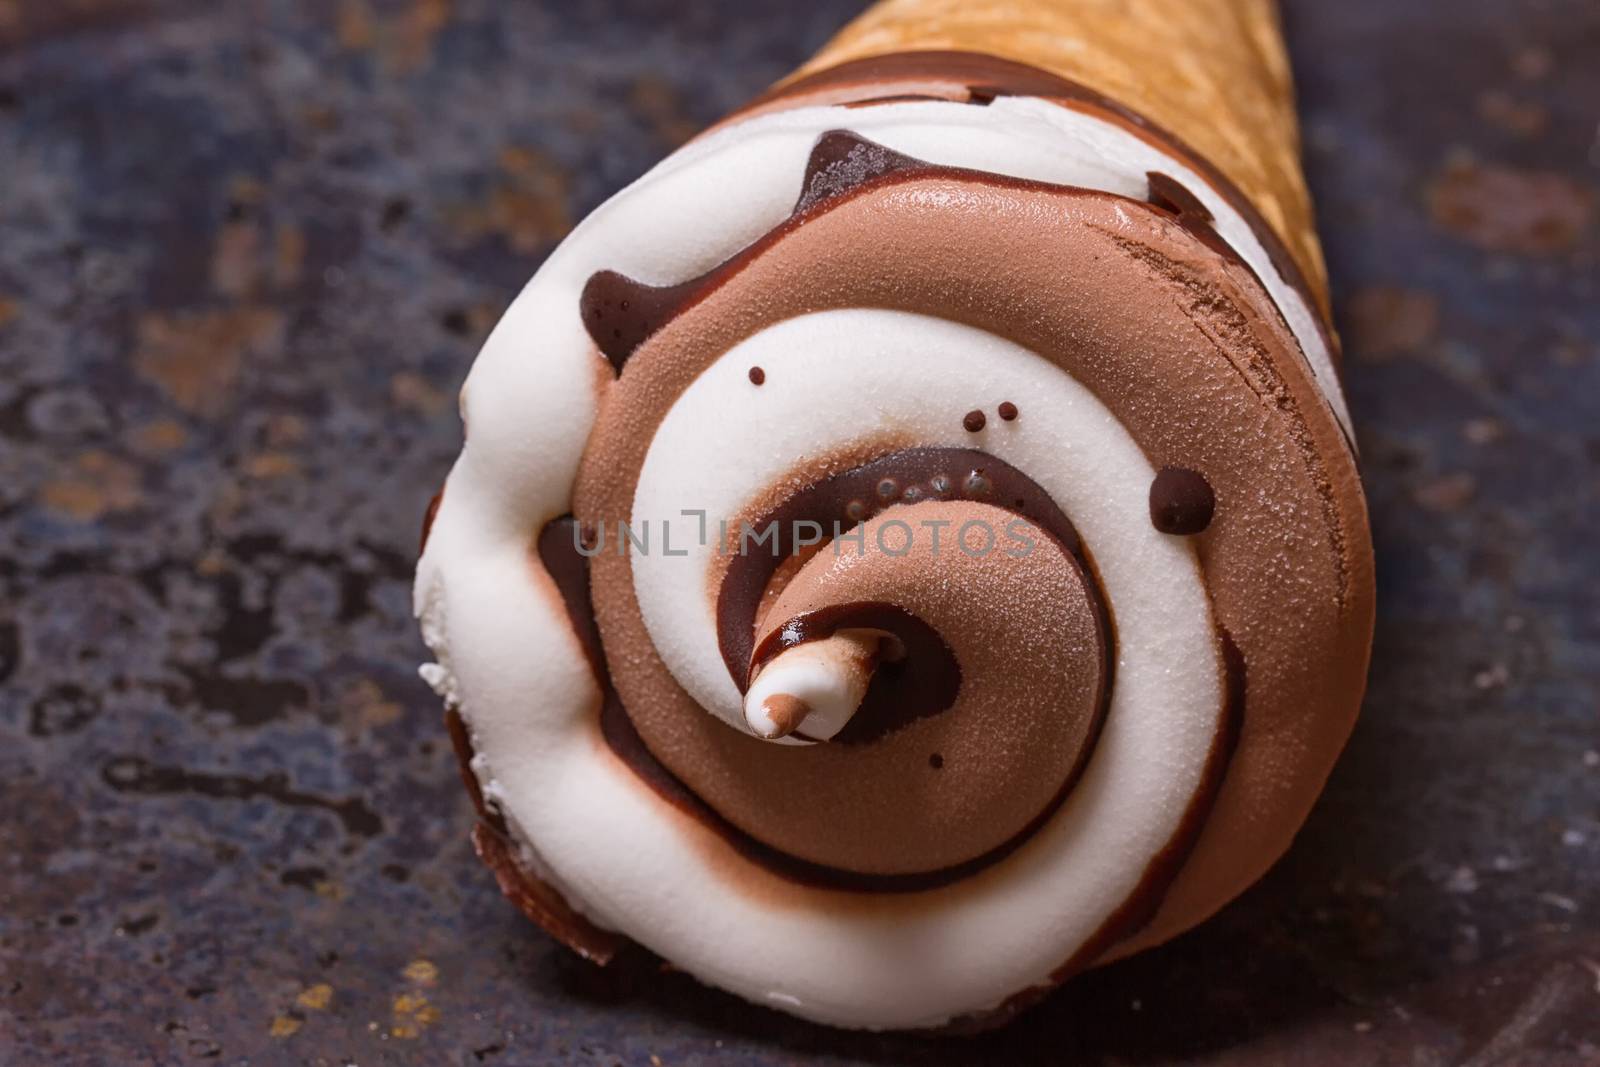 Vanilla ice cream cone with chocolate on an old grunge background